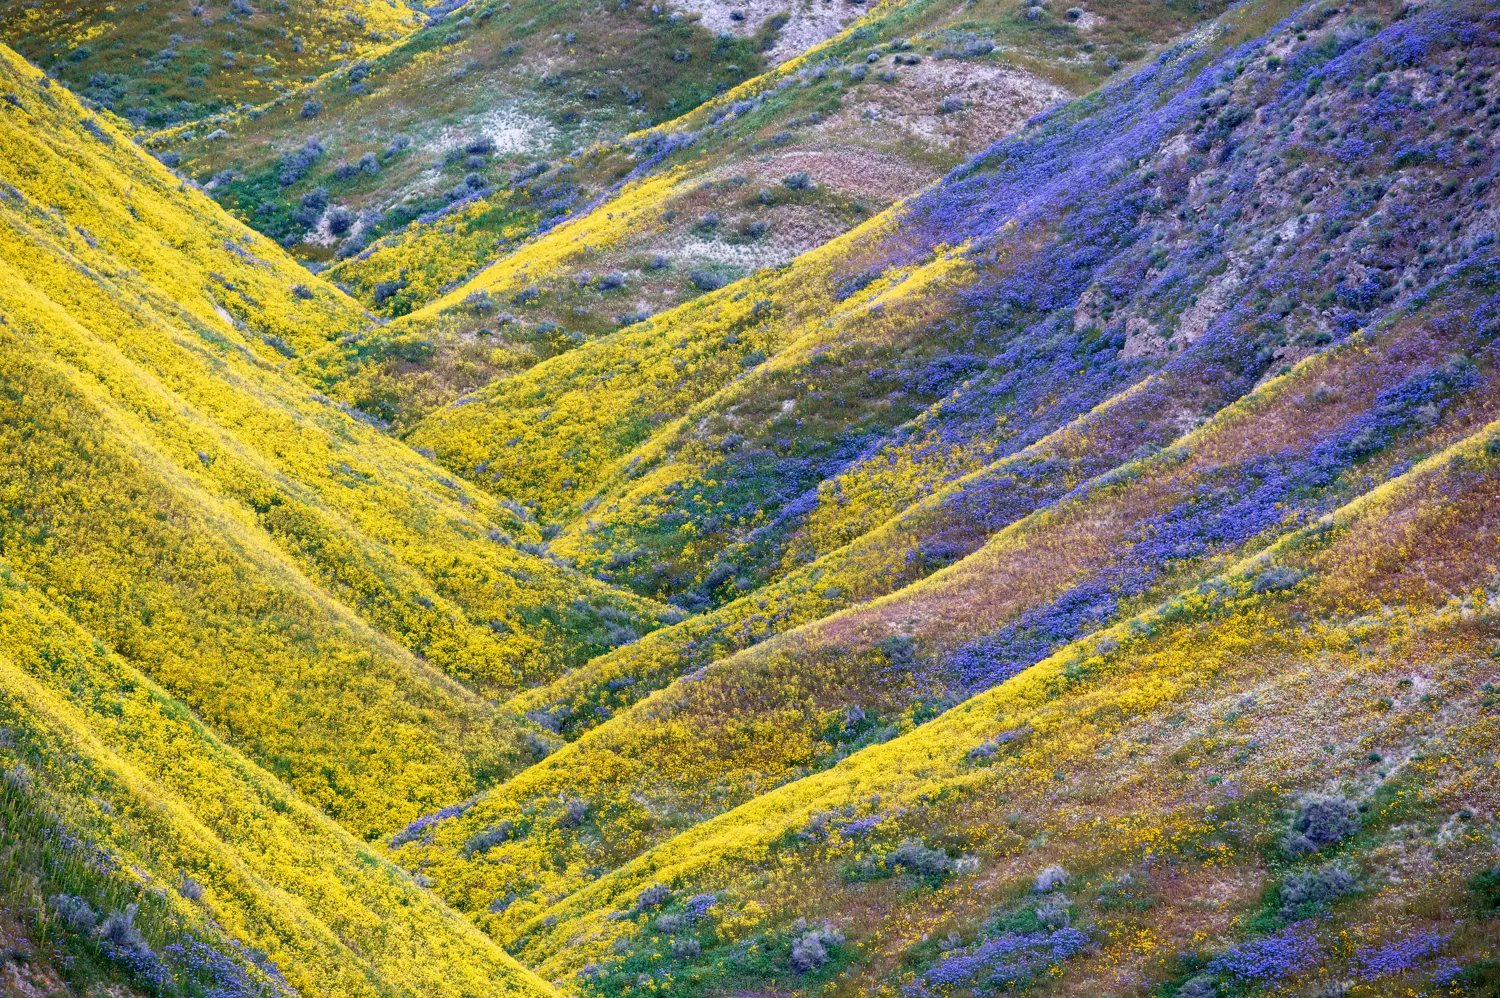 Wildflowers in the southern area of Carrizo Plain.